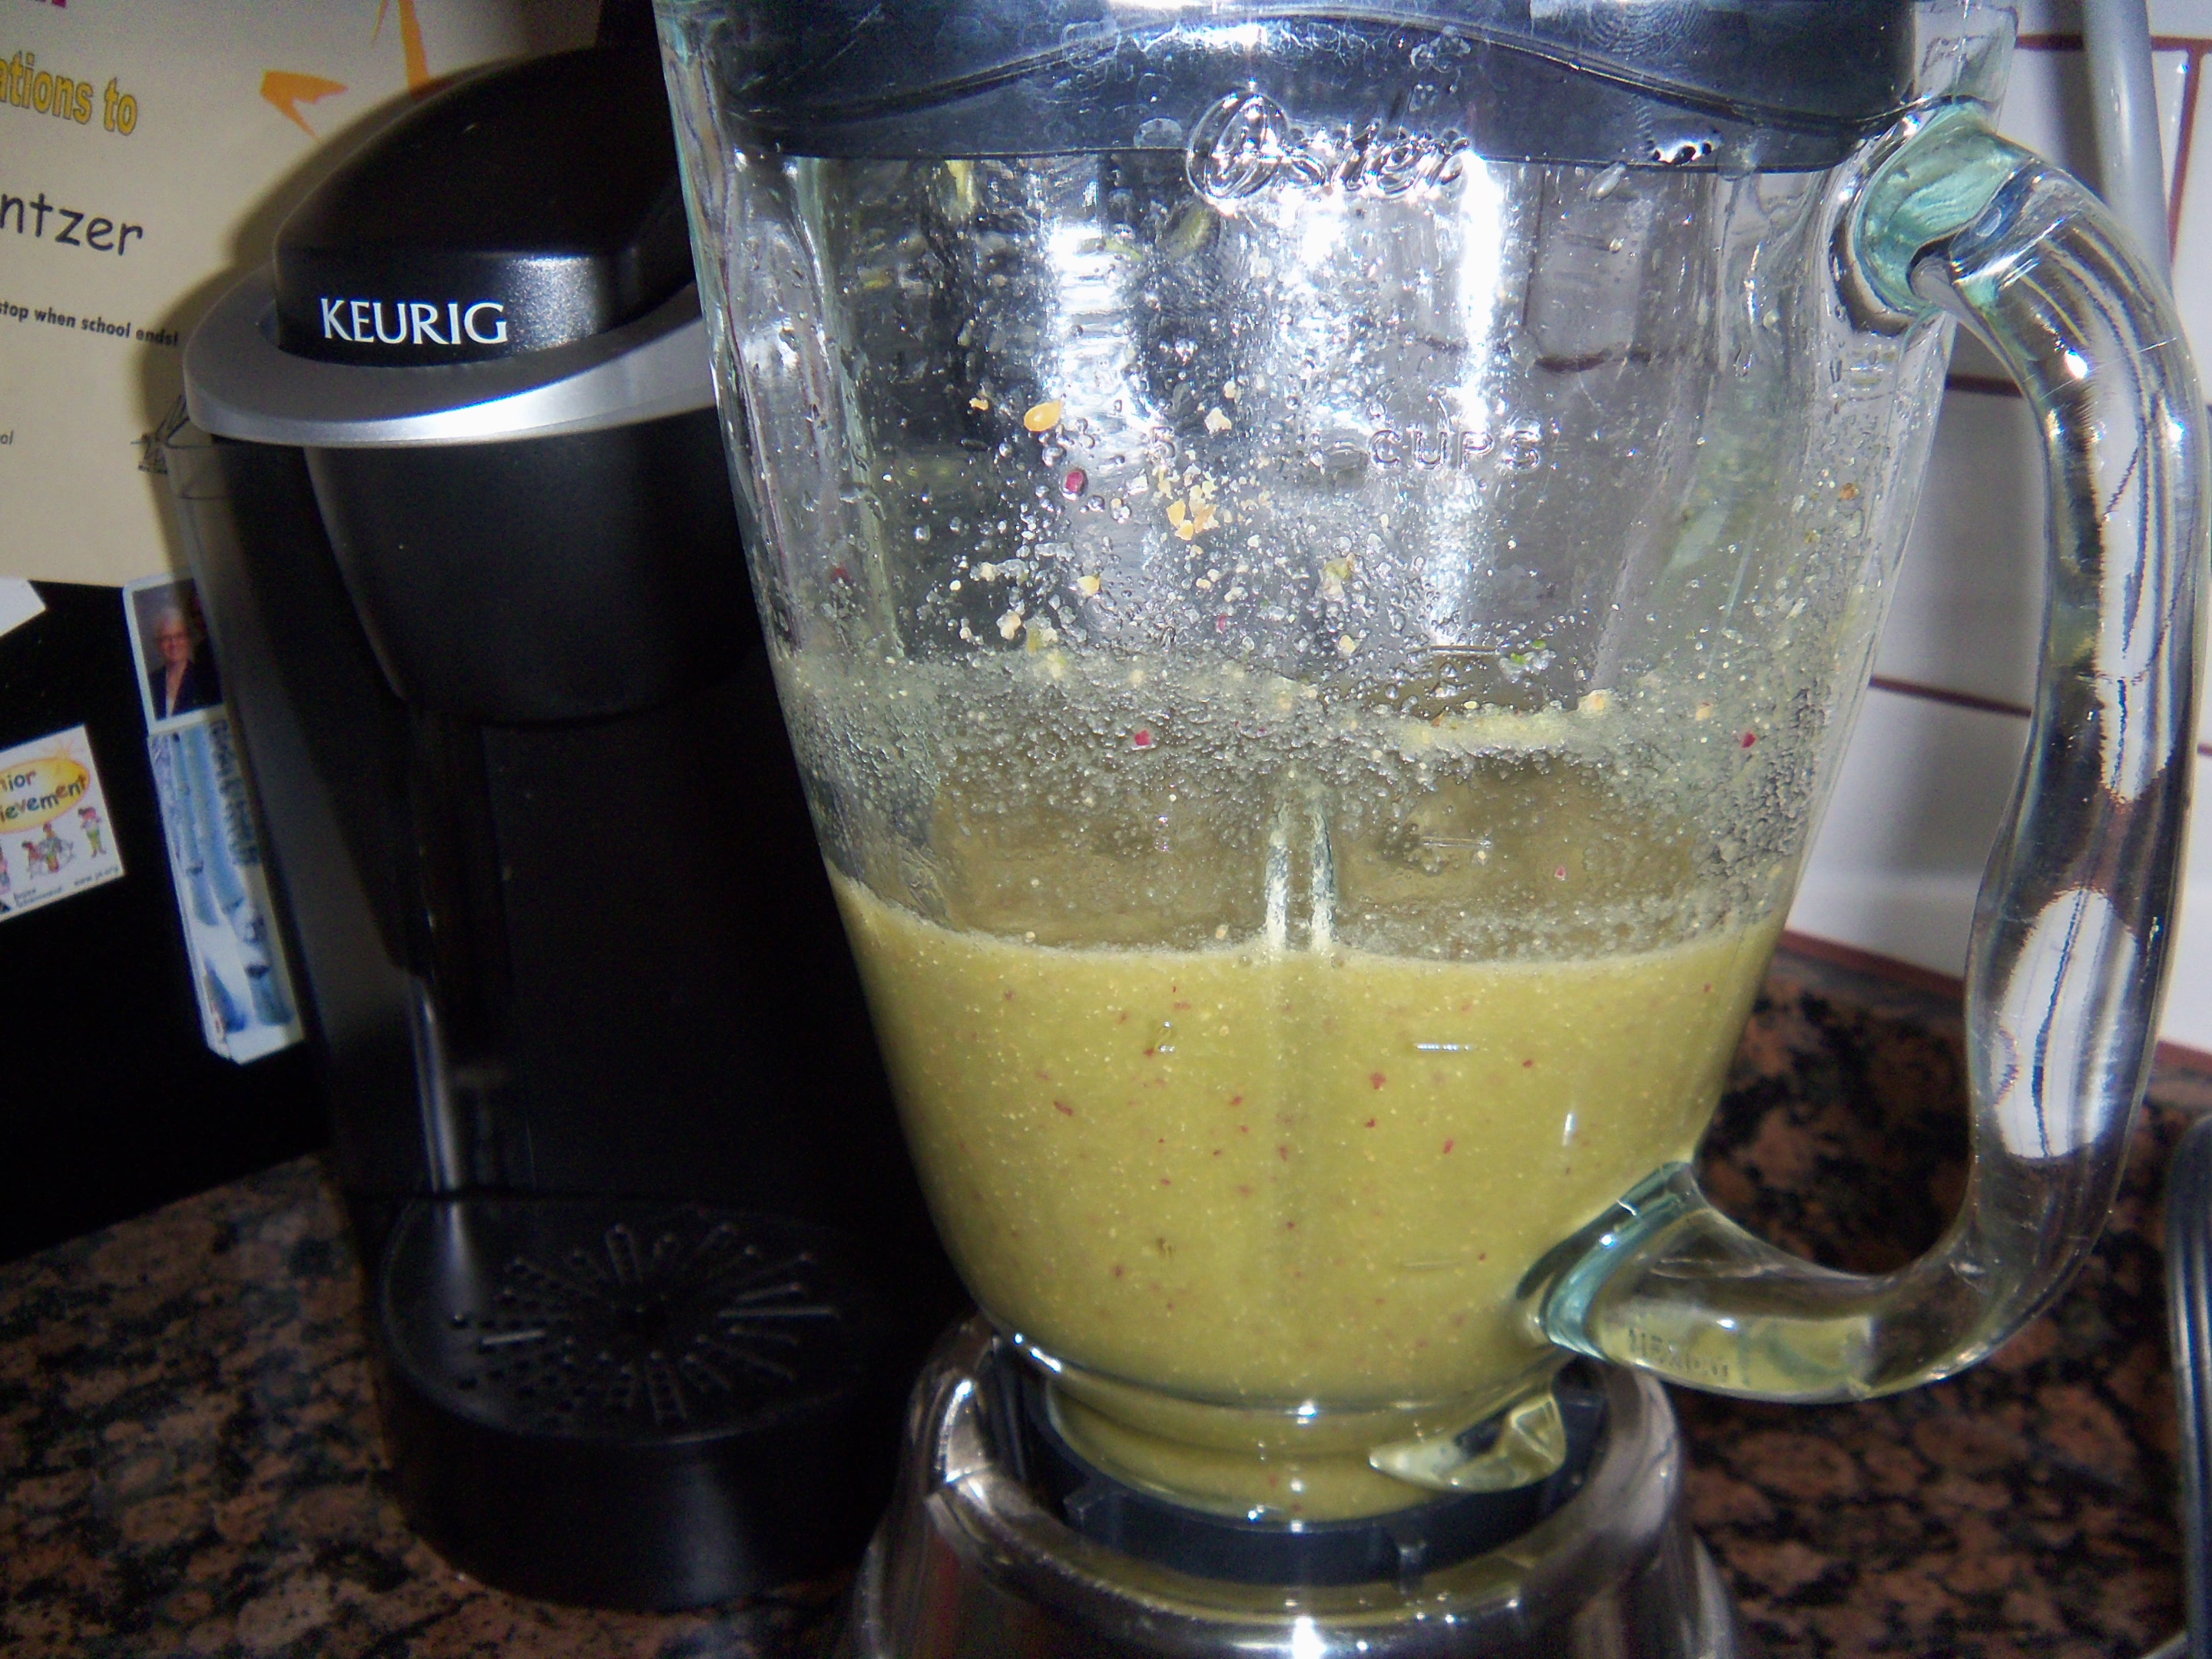 Want a boost - go for a green smoothie!